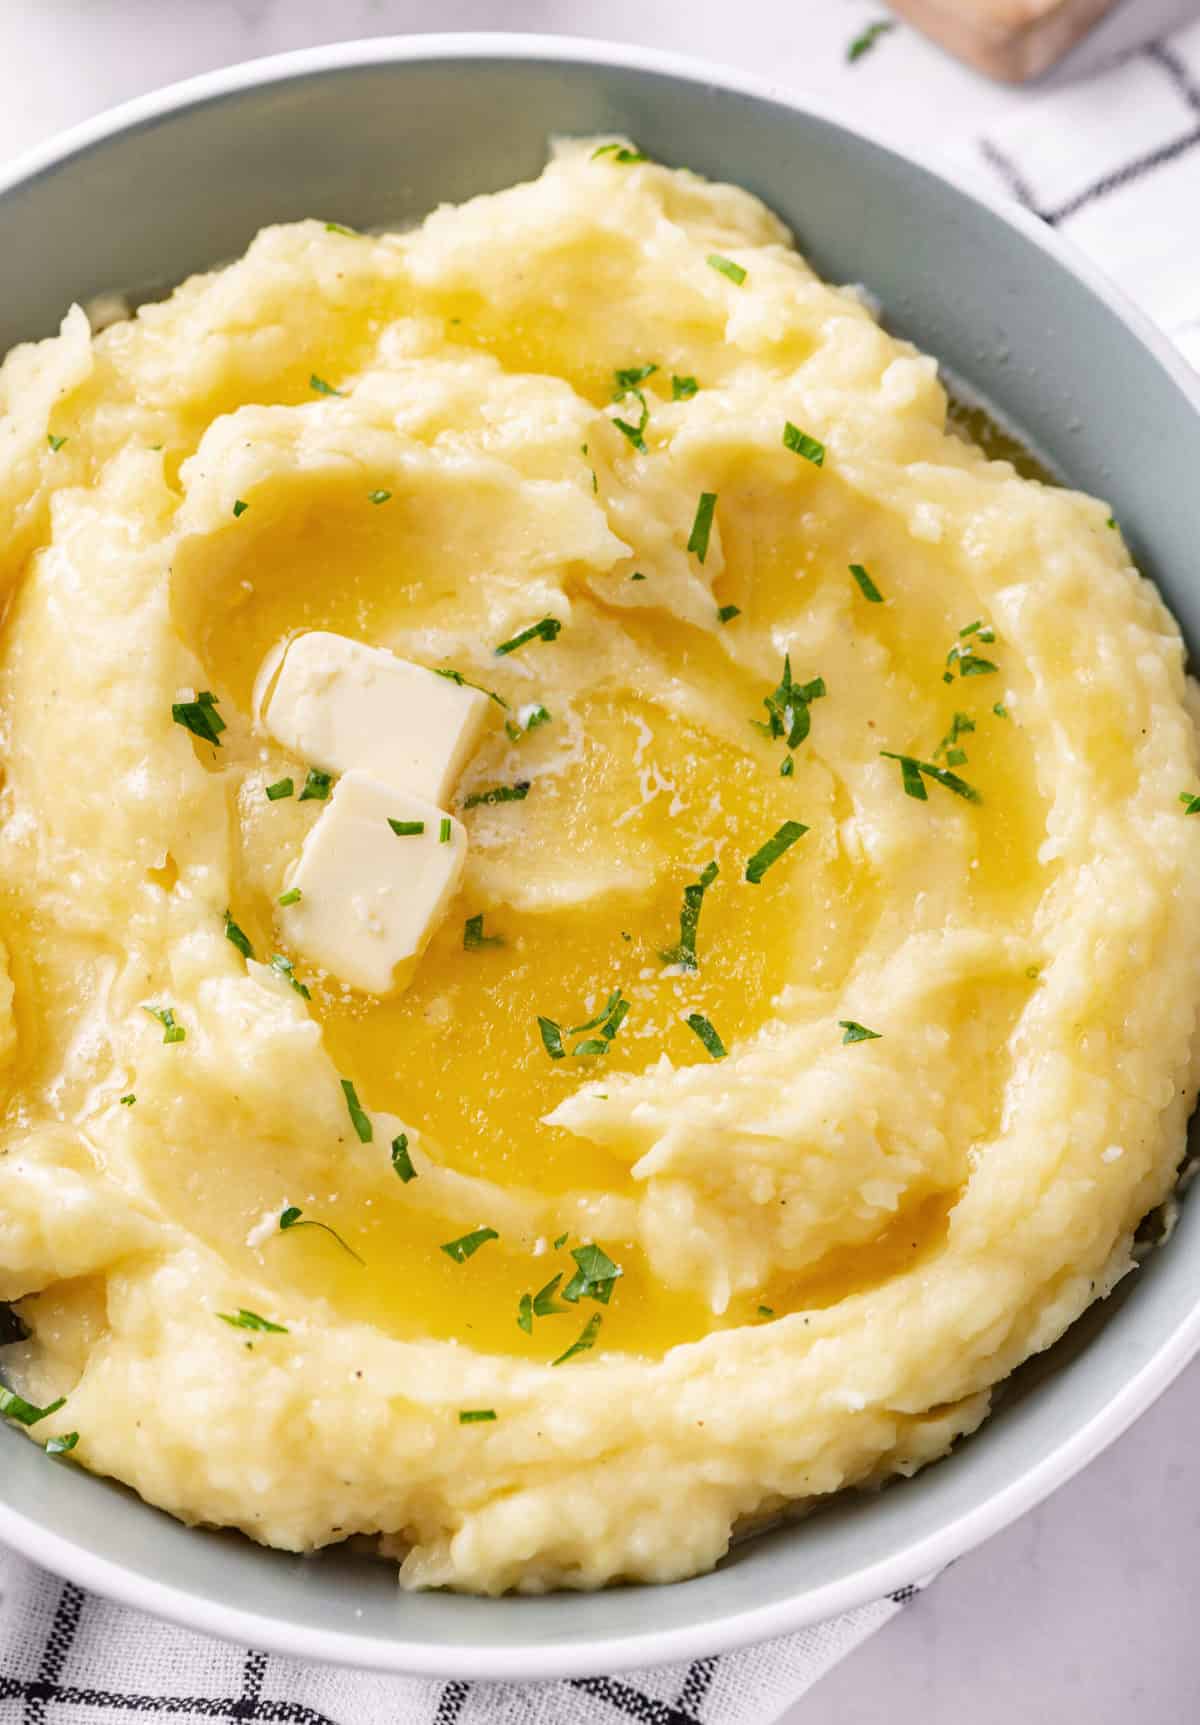 mashed potatoes with melted butter served in a bowl